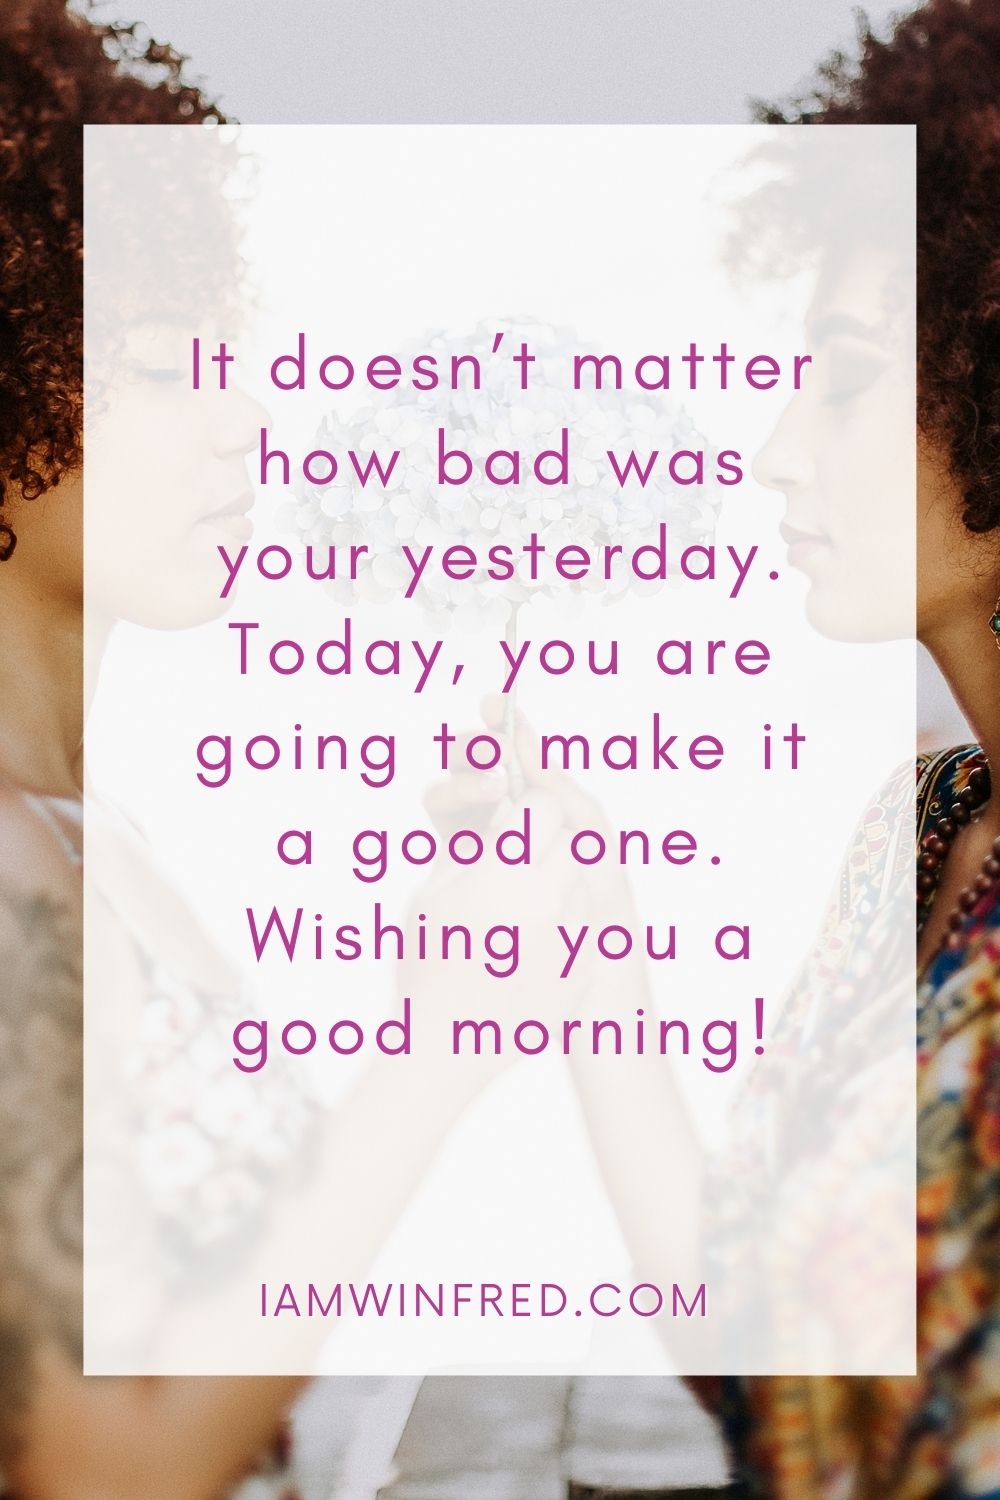 It Doesnt Matter How Bad Was Your Yesterday. Today You Are Going To Make It A Good One. Wishing You A Good Morning